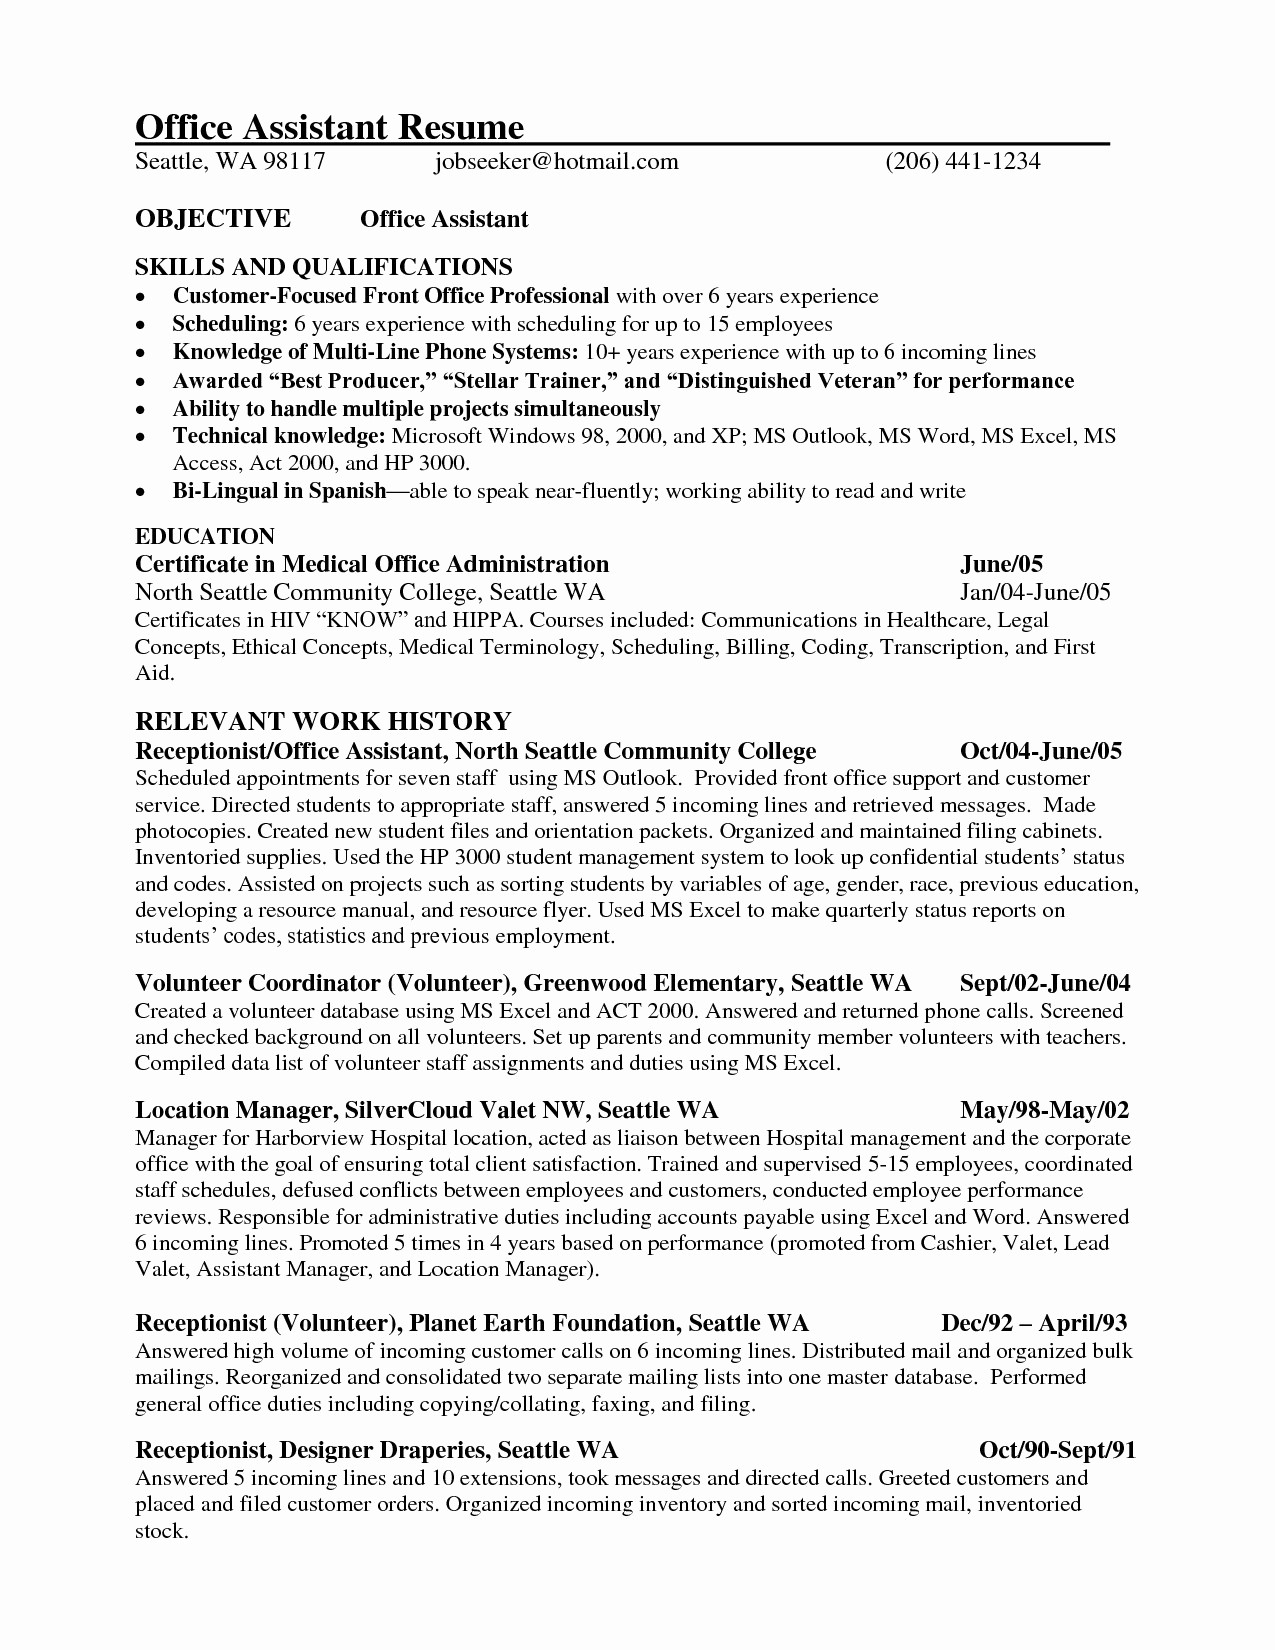 Sales Resume Template Microsoft Word Best Of Free Medical Resume Templates Microsoft Word Sales Invoice